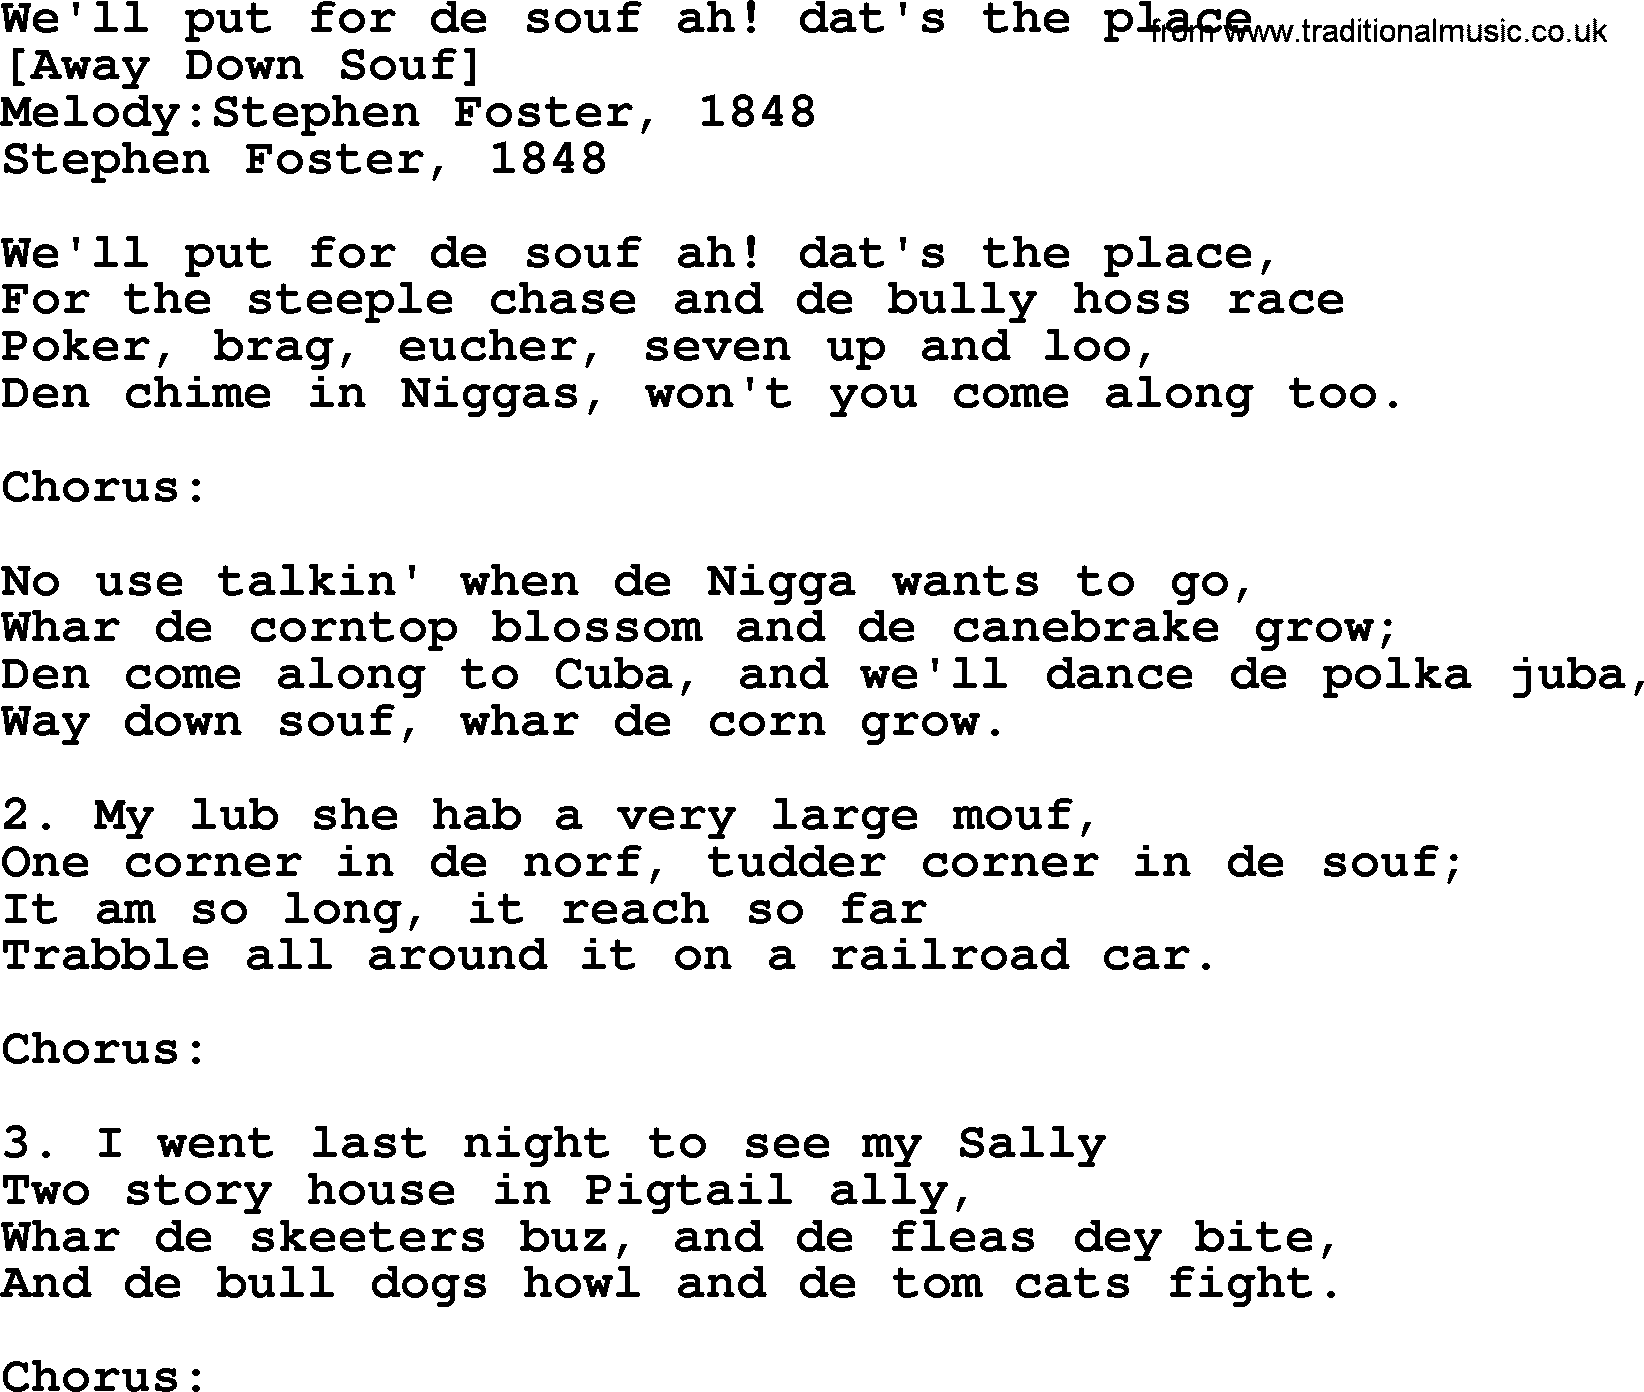 Old American Song: We'll Put For De Souf Ah! Dat's The Place, lyrics